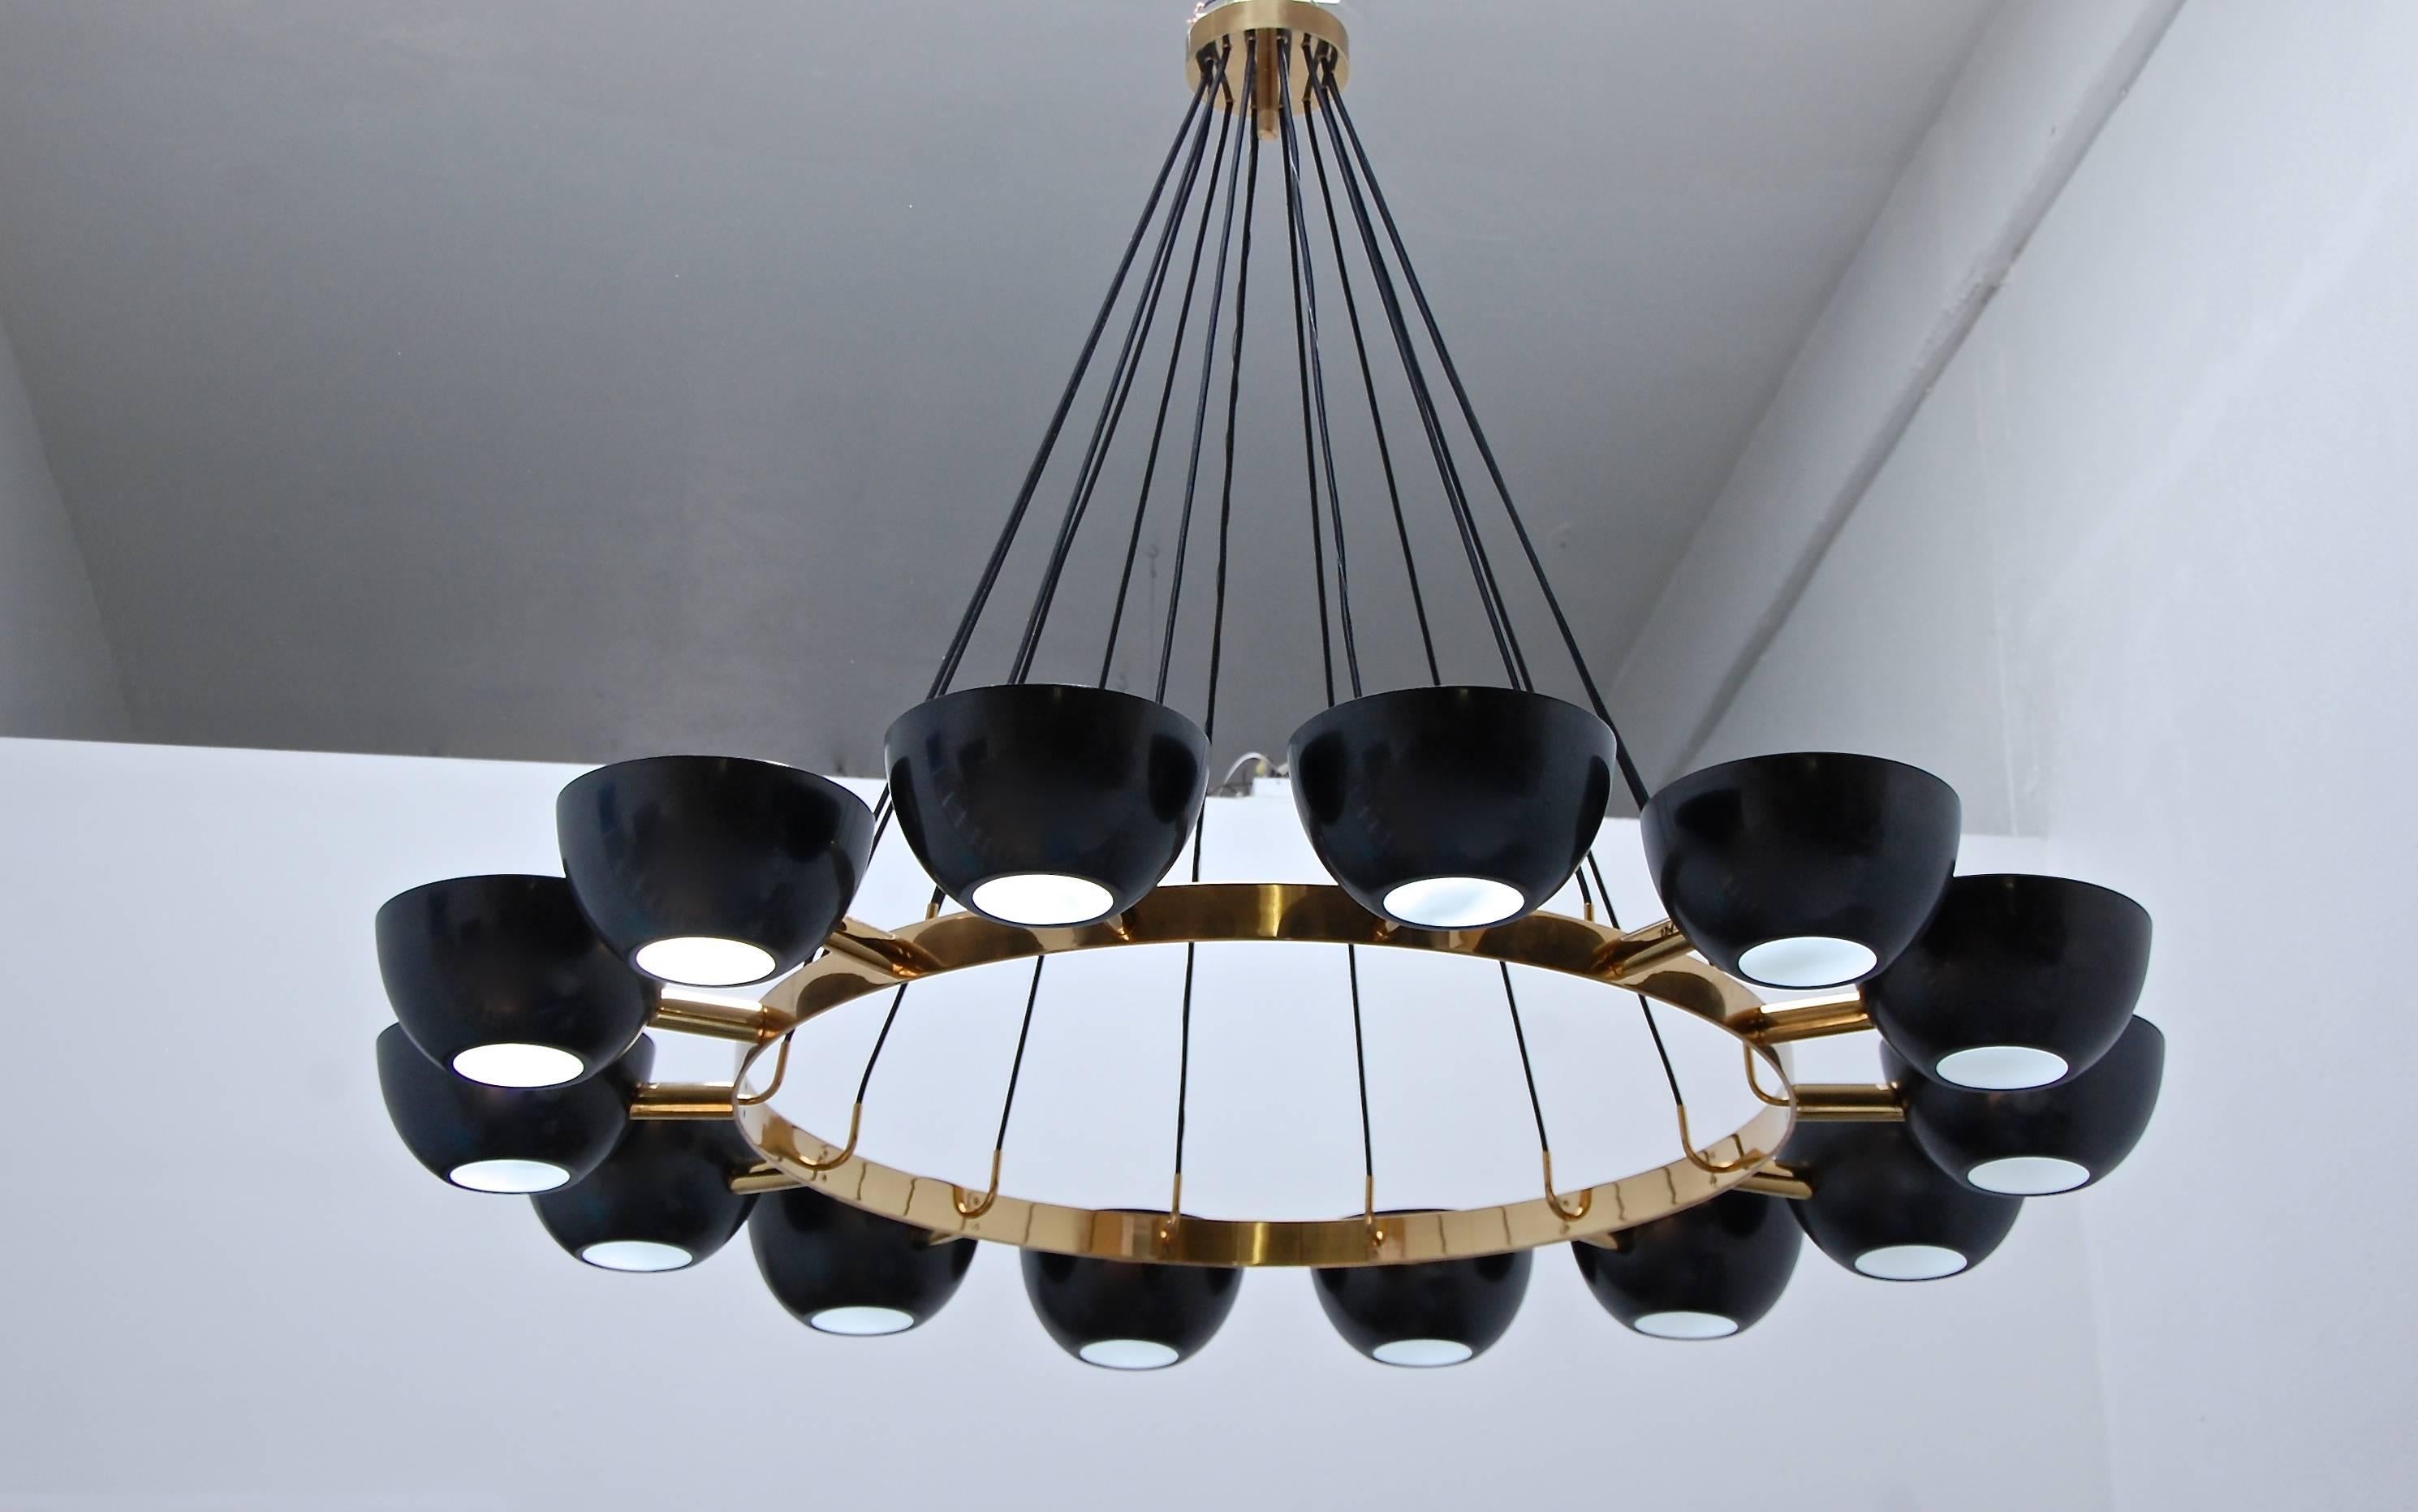 The LUcrown contemporary chandelier draws from classic Italian design from the 1950s. In a 65” diameter, this chandelier with 14 10” x 5